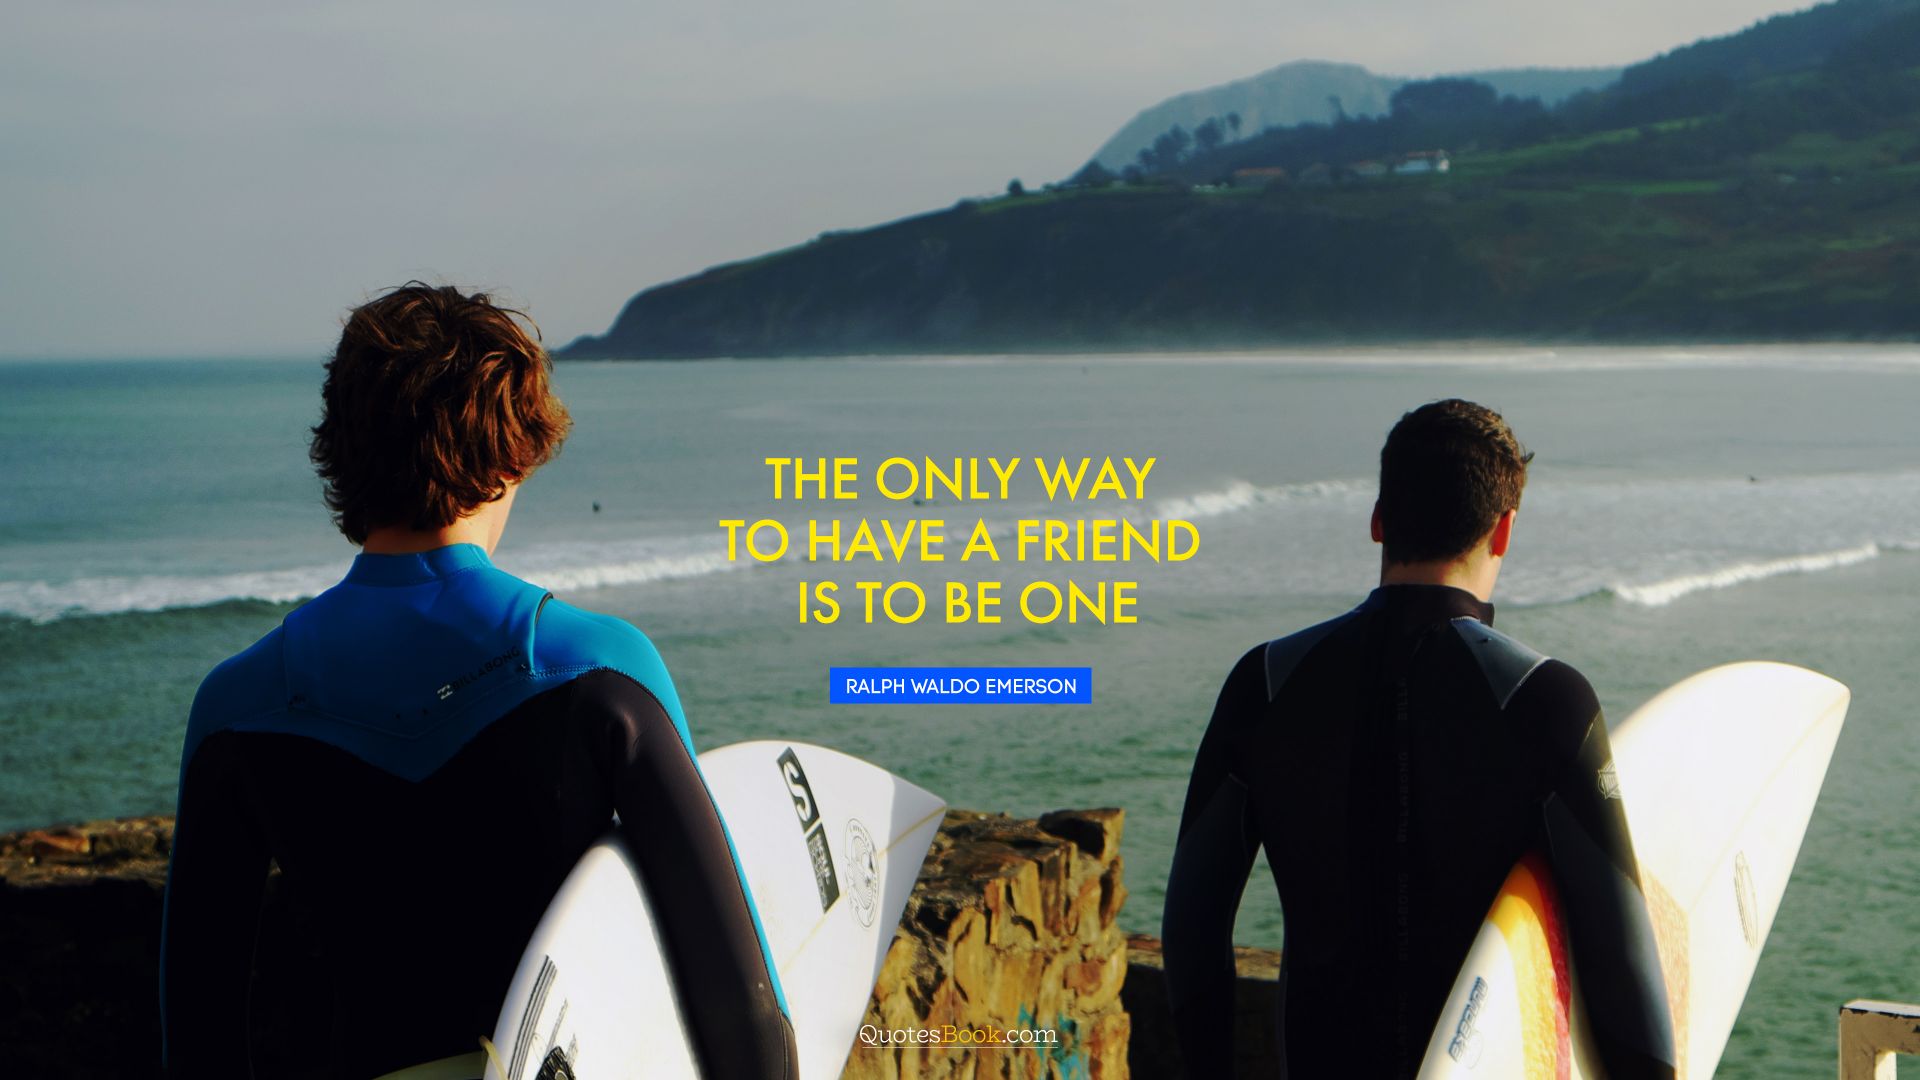 The only way to have a friend is to be one. - Quote by Ralph Waldo Emerson